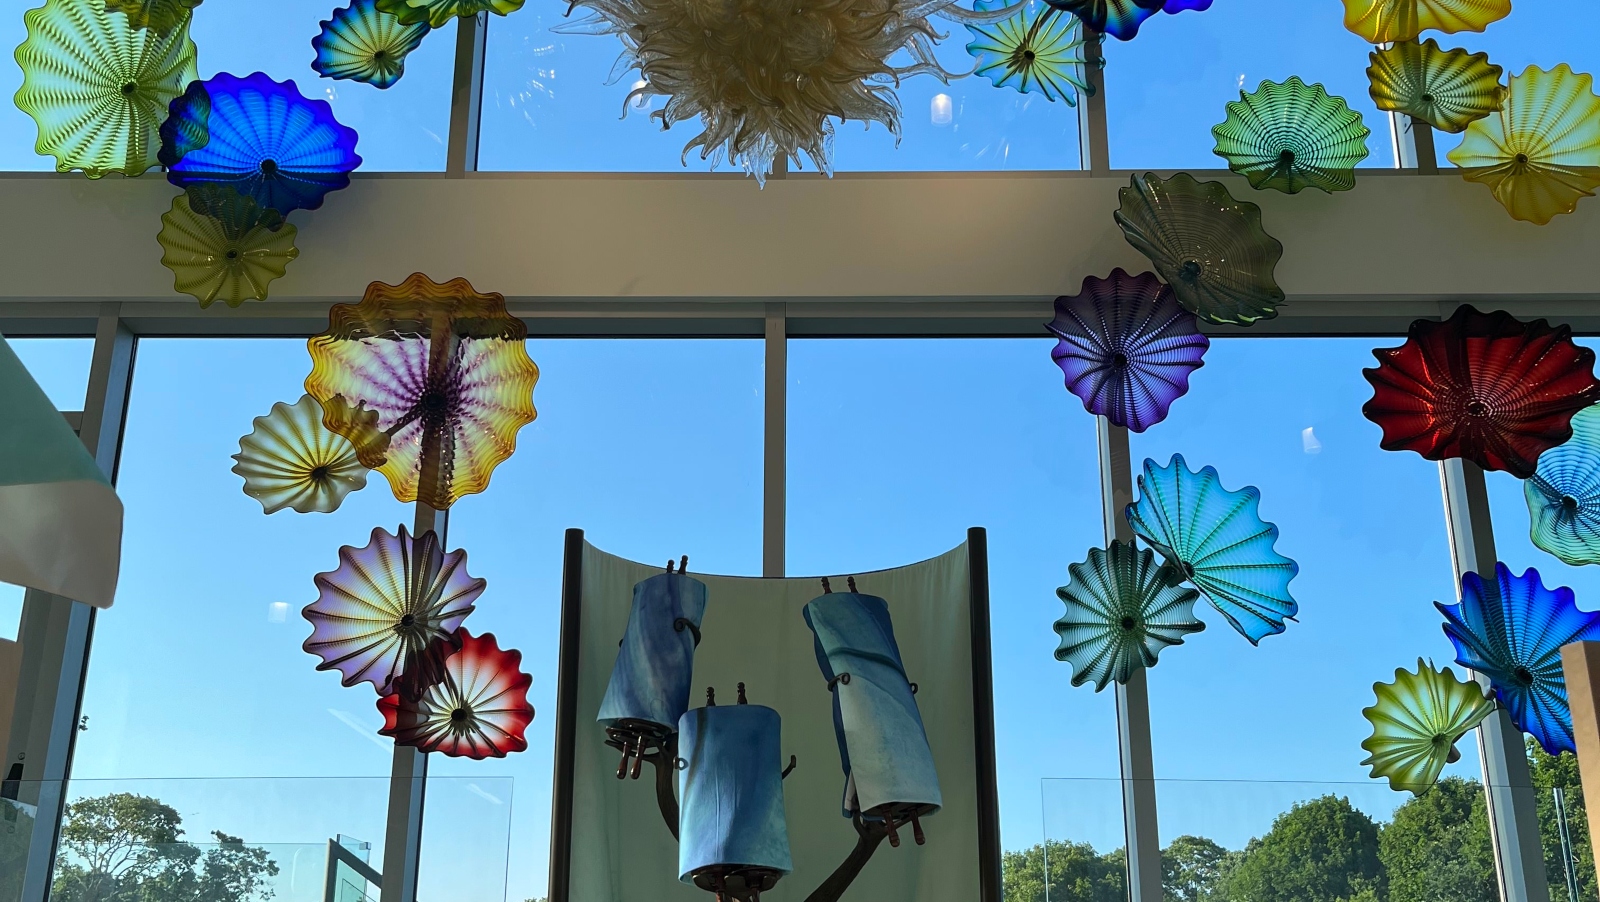 Dale Chihulyâ€™s glass installation is accompanied by fabric decorations created using digital textile printing technology. Photo courtesy of Kornit Digital. Â© 2022 Chihuly Studio. All rights reserved